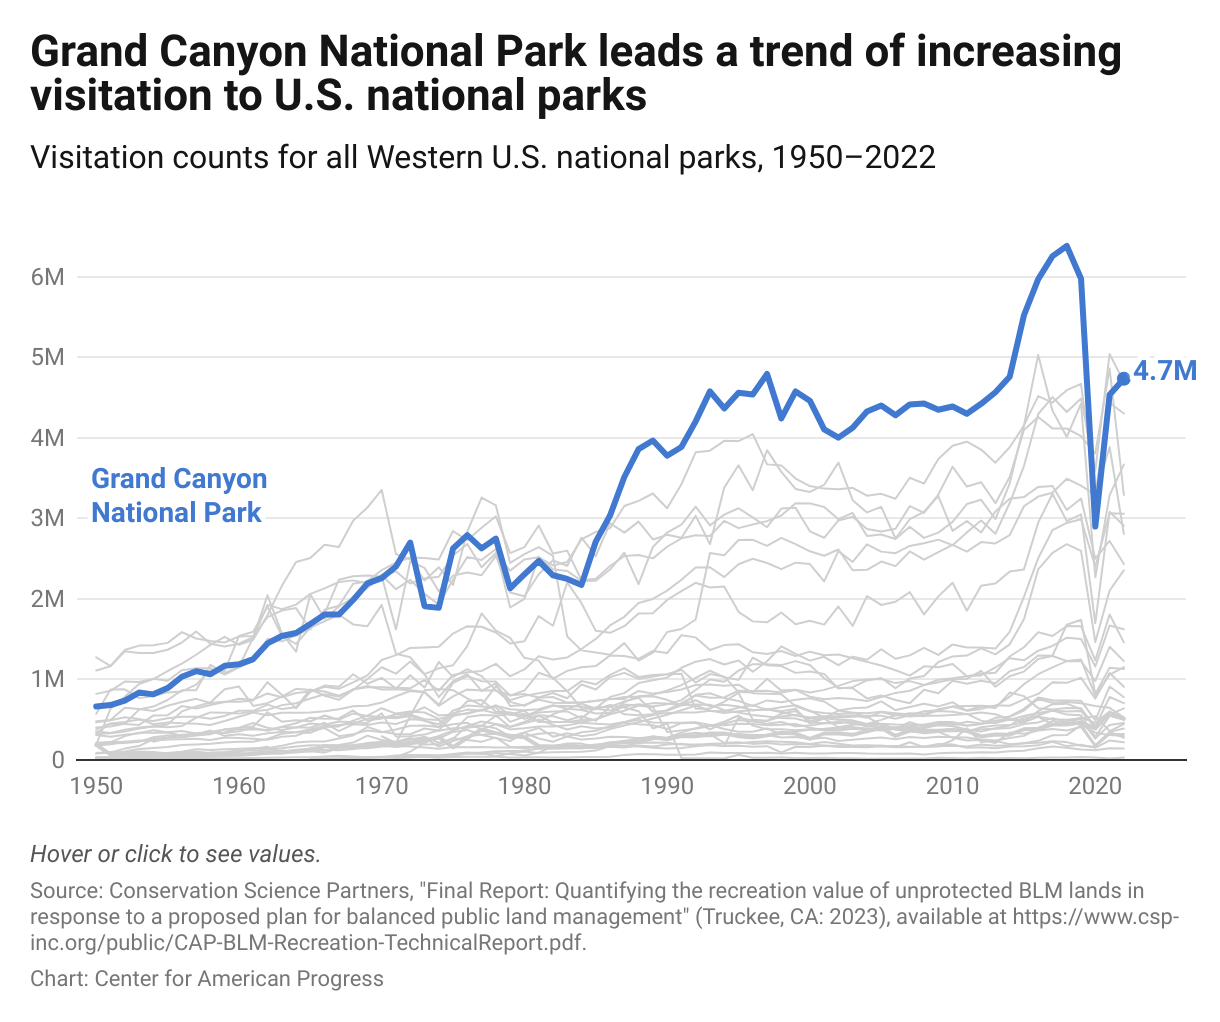 Graph showing that U.S. national parks, led by Grand Canyon National Park, have seen significant increases in visitation over time, with a significant peak before 2020.